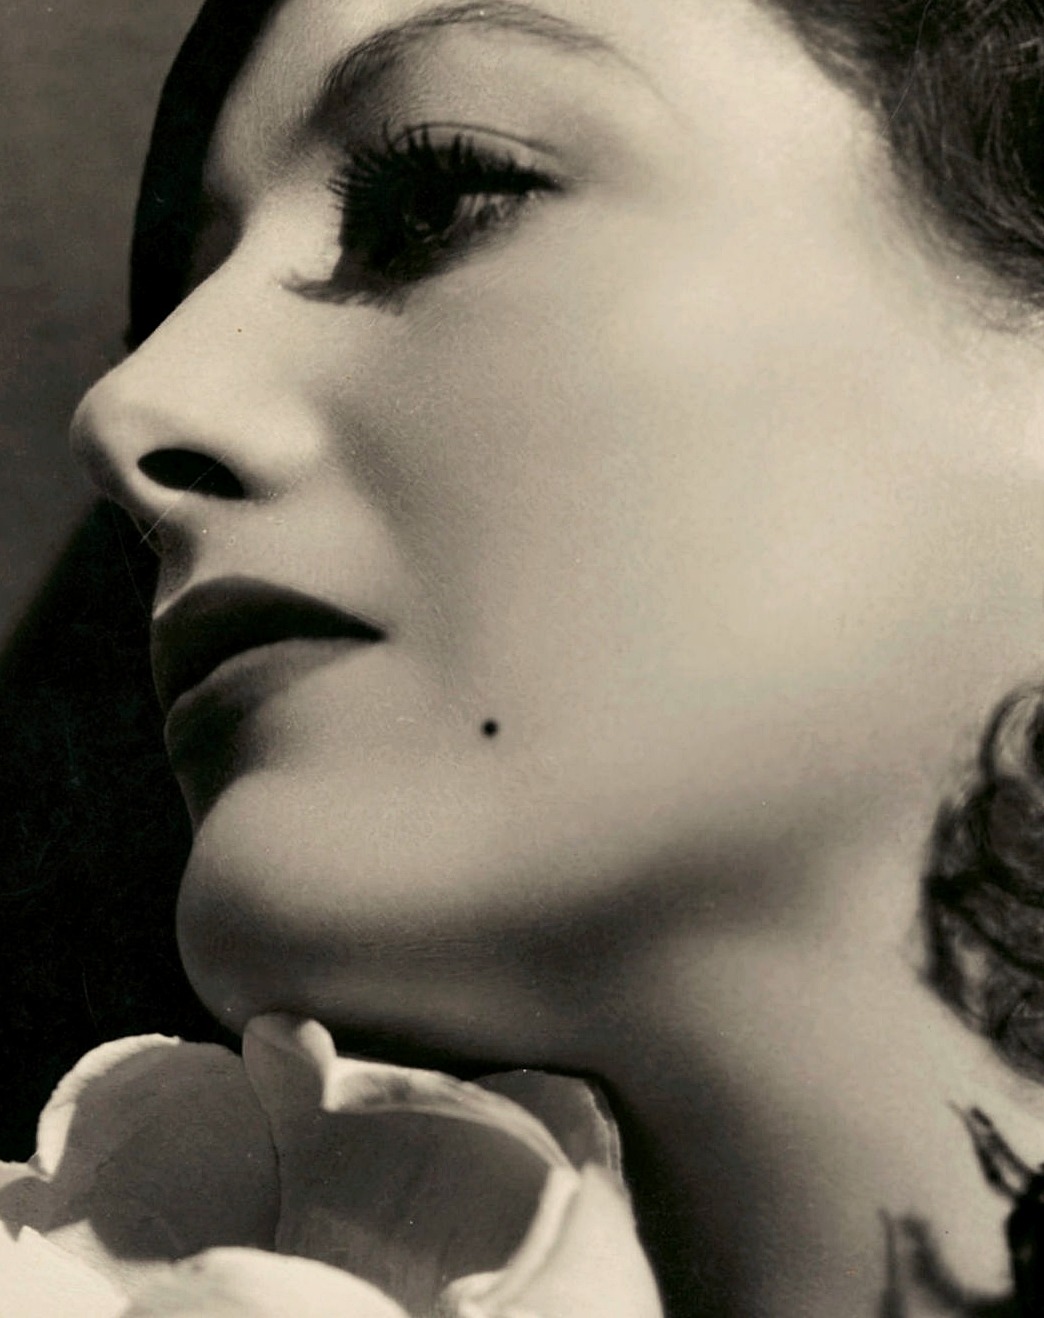 
Photographed by George Hurrell.
